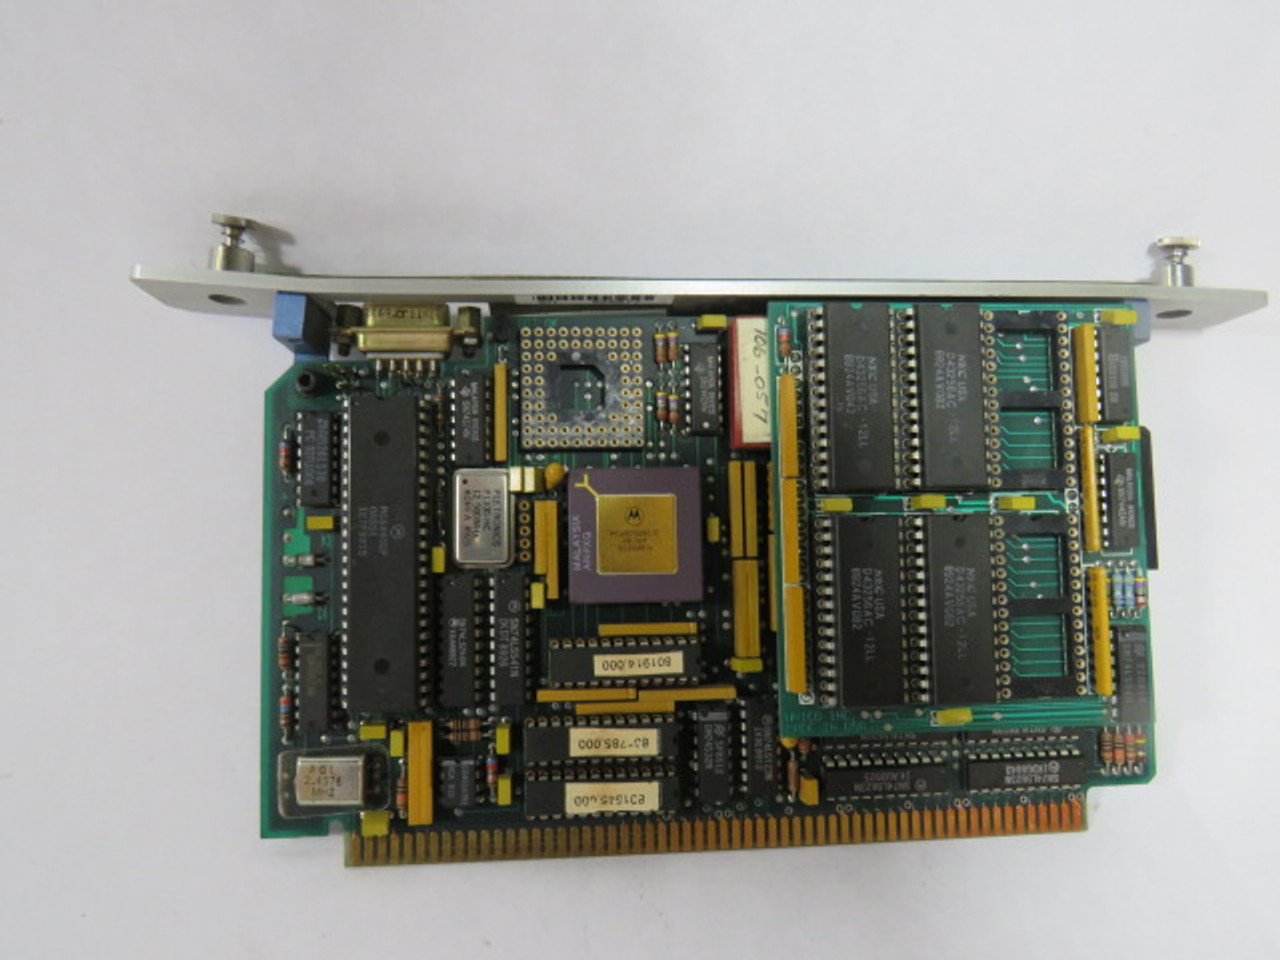 Unico 310-386 309-595.6 Processor Memory Ably. *Missing Memory Chips* ! AS IS !